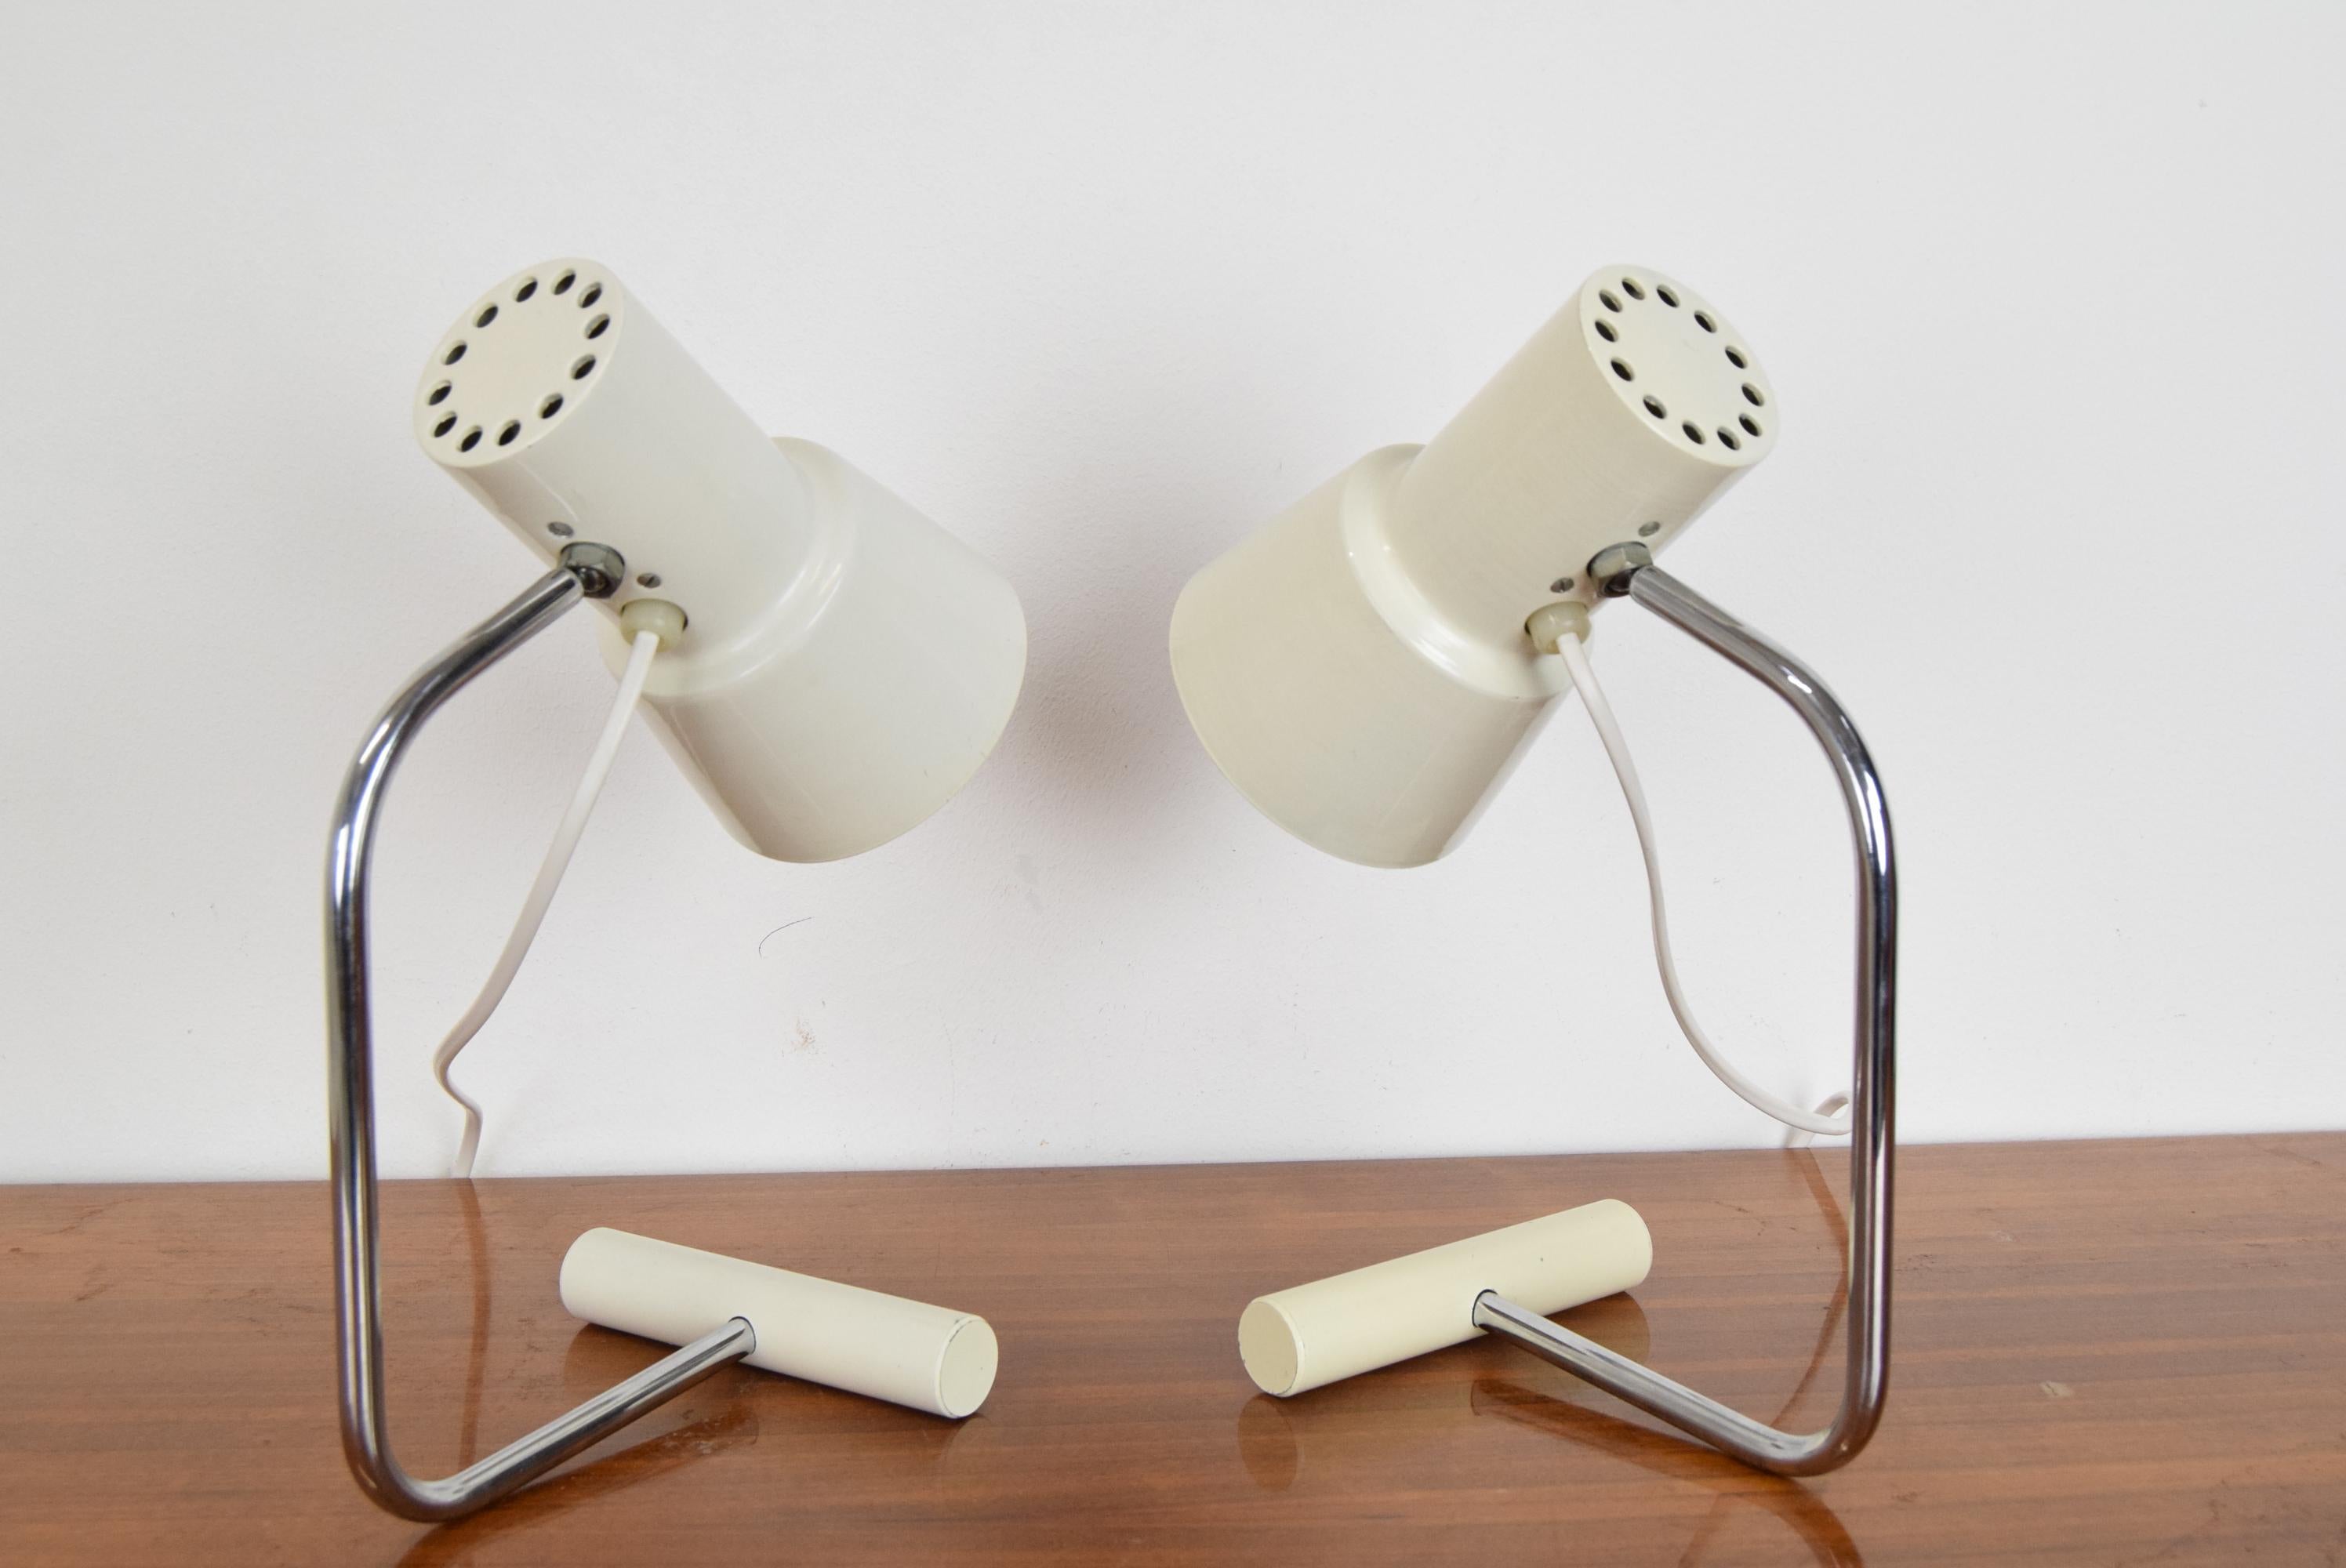 Czech Pair of Mid Century Table Lamps by Josef Hurka for Napako, 1970's For Sale